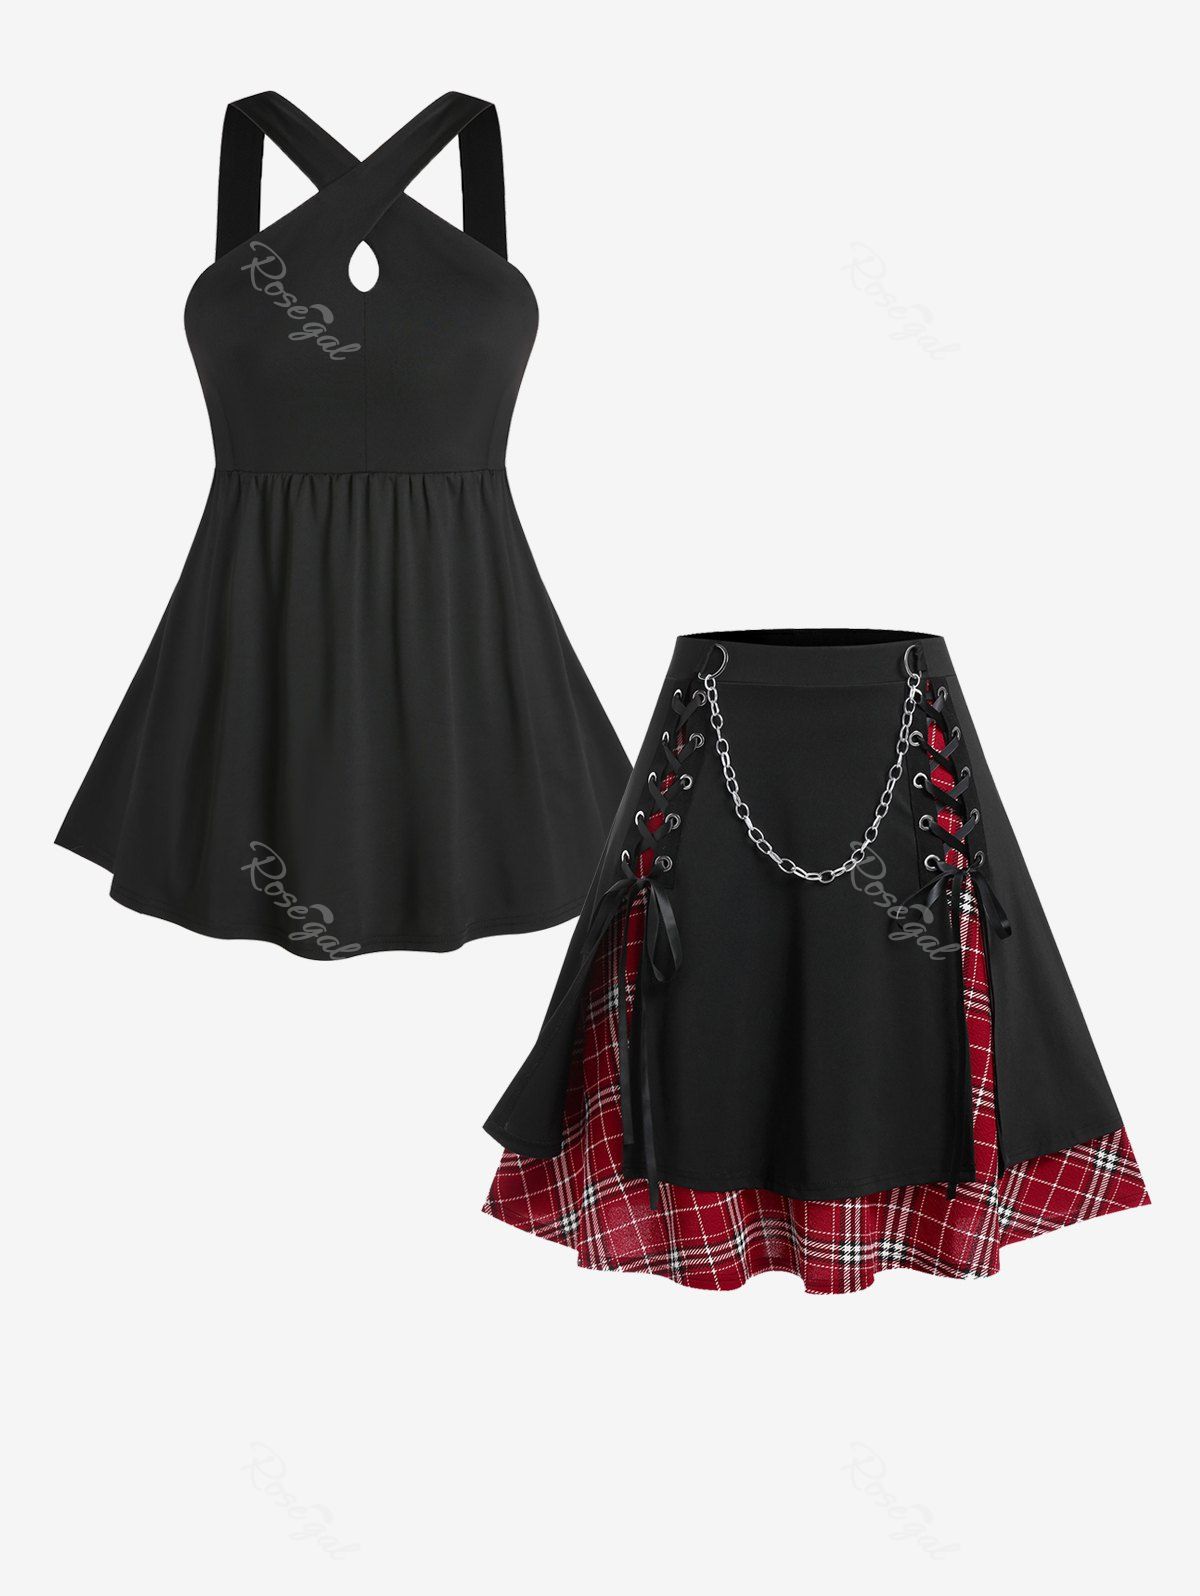 Fashion Cross Tunic Top and Gothic Chains Lace Up Layered Plaid Skirt Plus Size Summer Outfit  